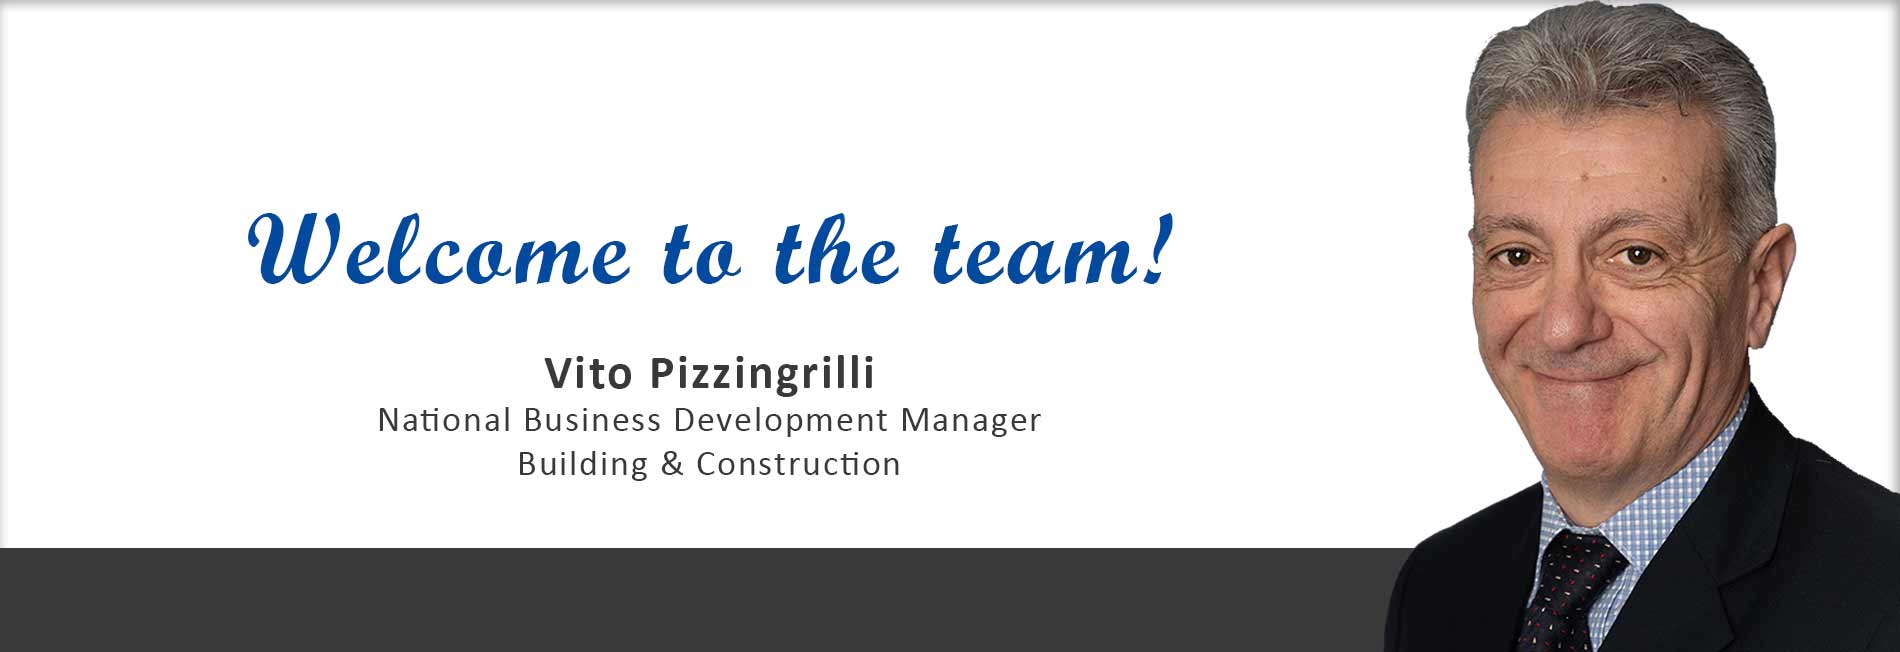 Vito Pizzingrilli - National Business Development Manager ANZ, Building and Construction, Pacific Urethanes